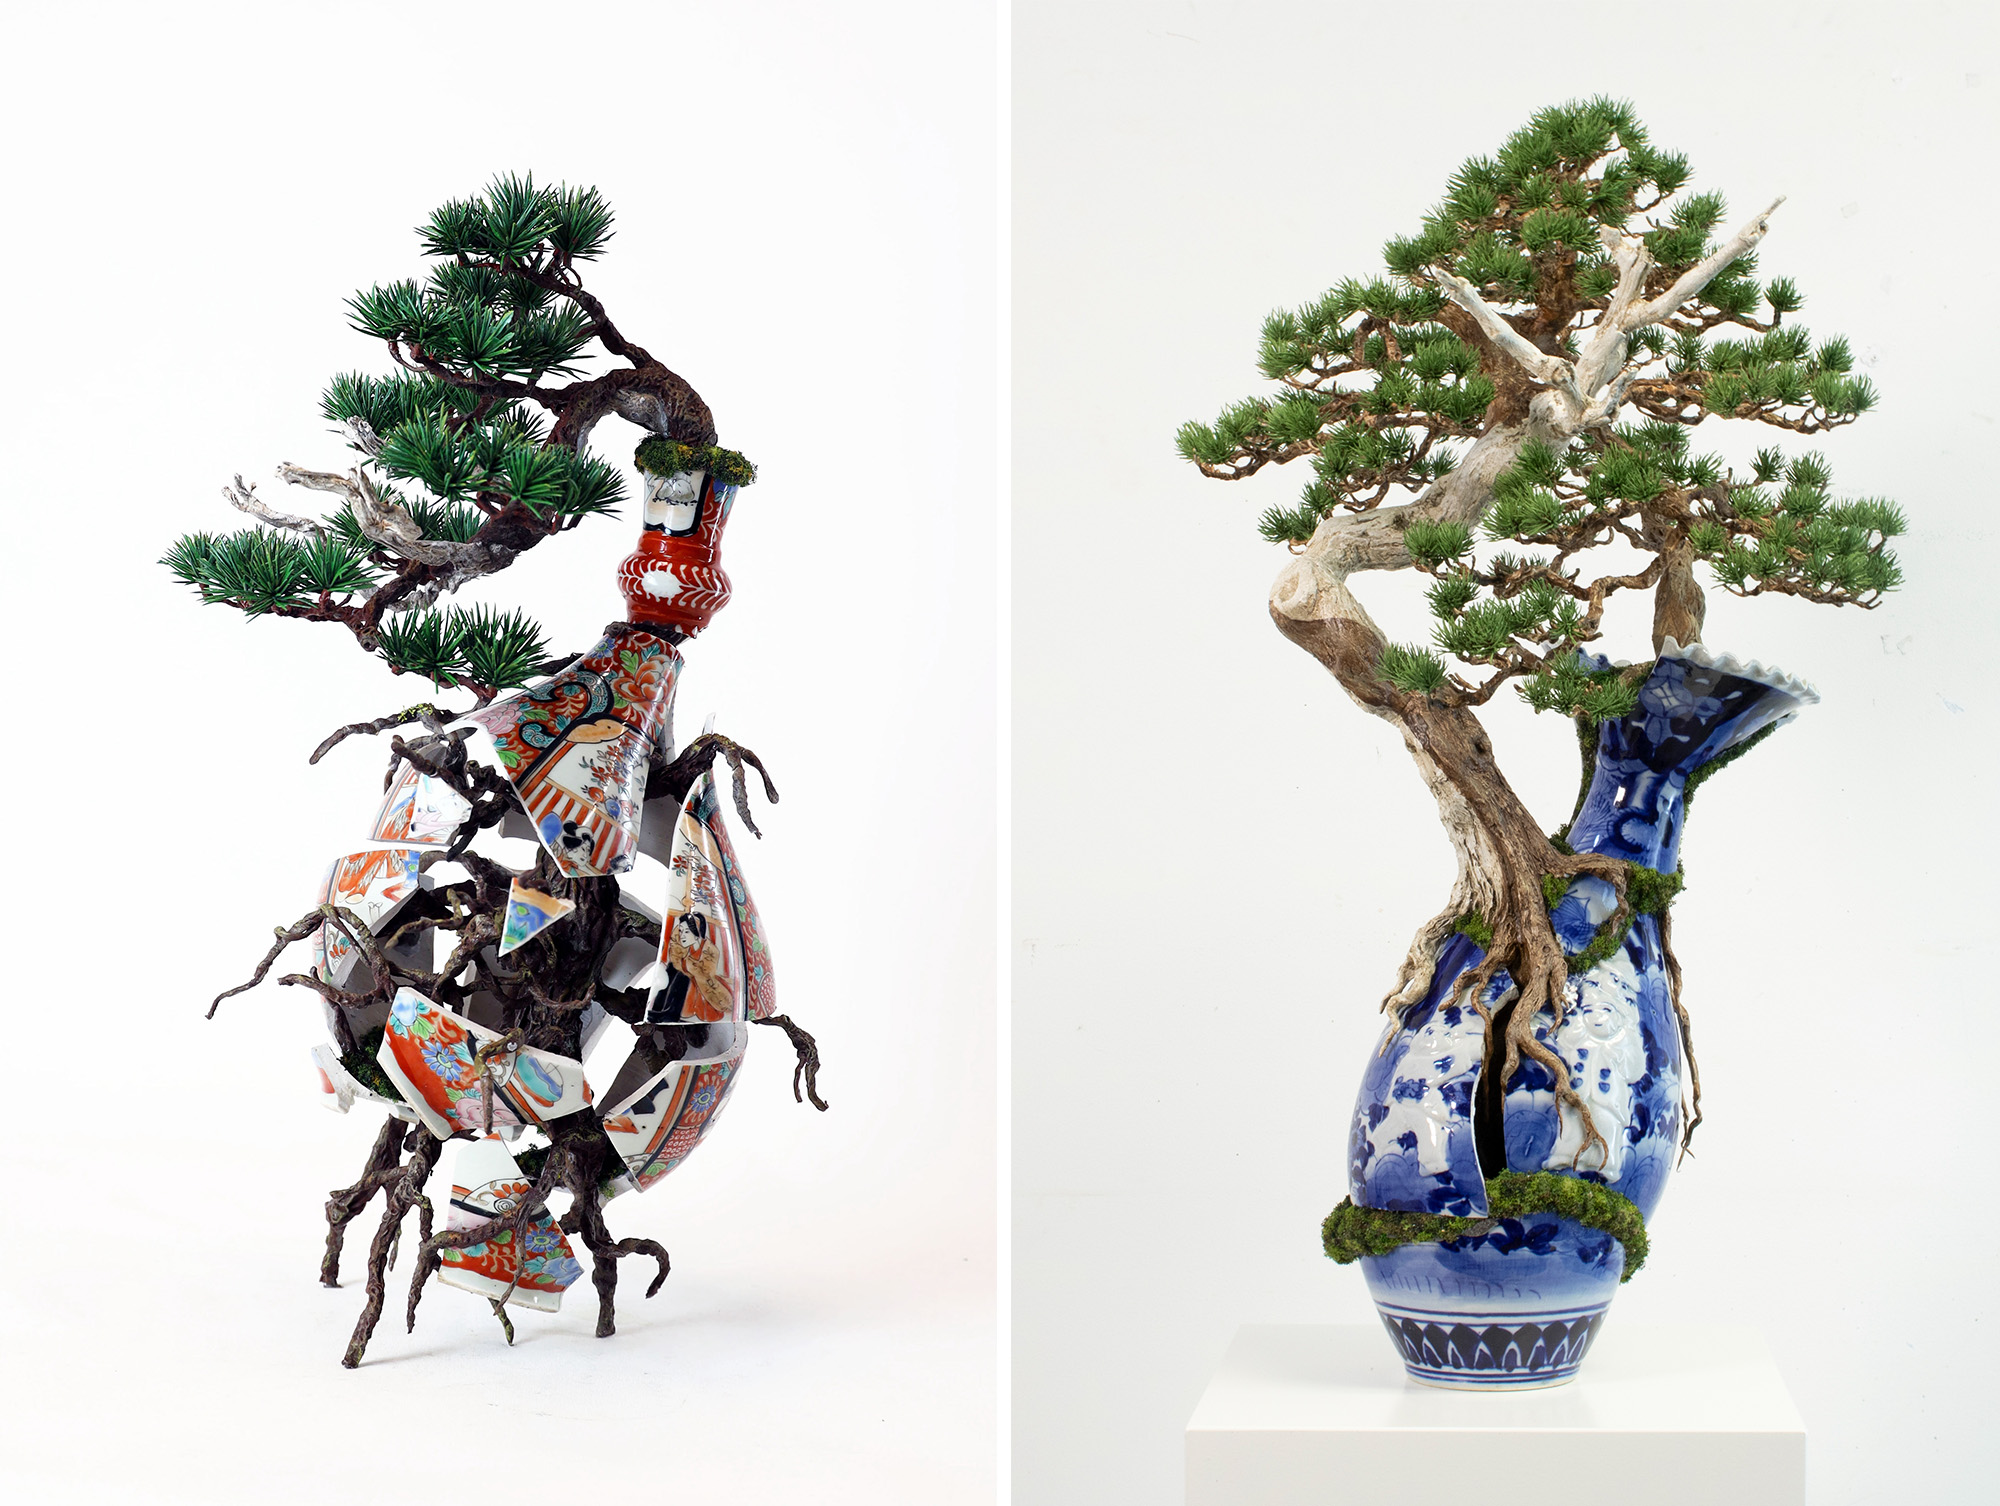 Two images of sculptures of a bonsai tree bursting out of antique vases.